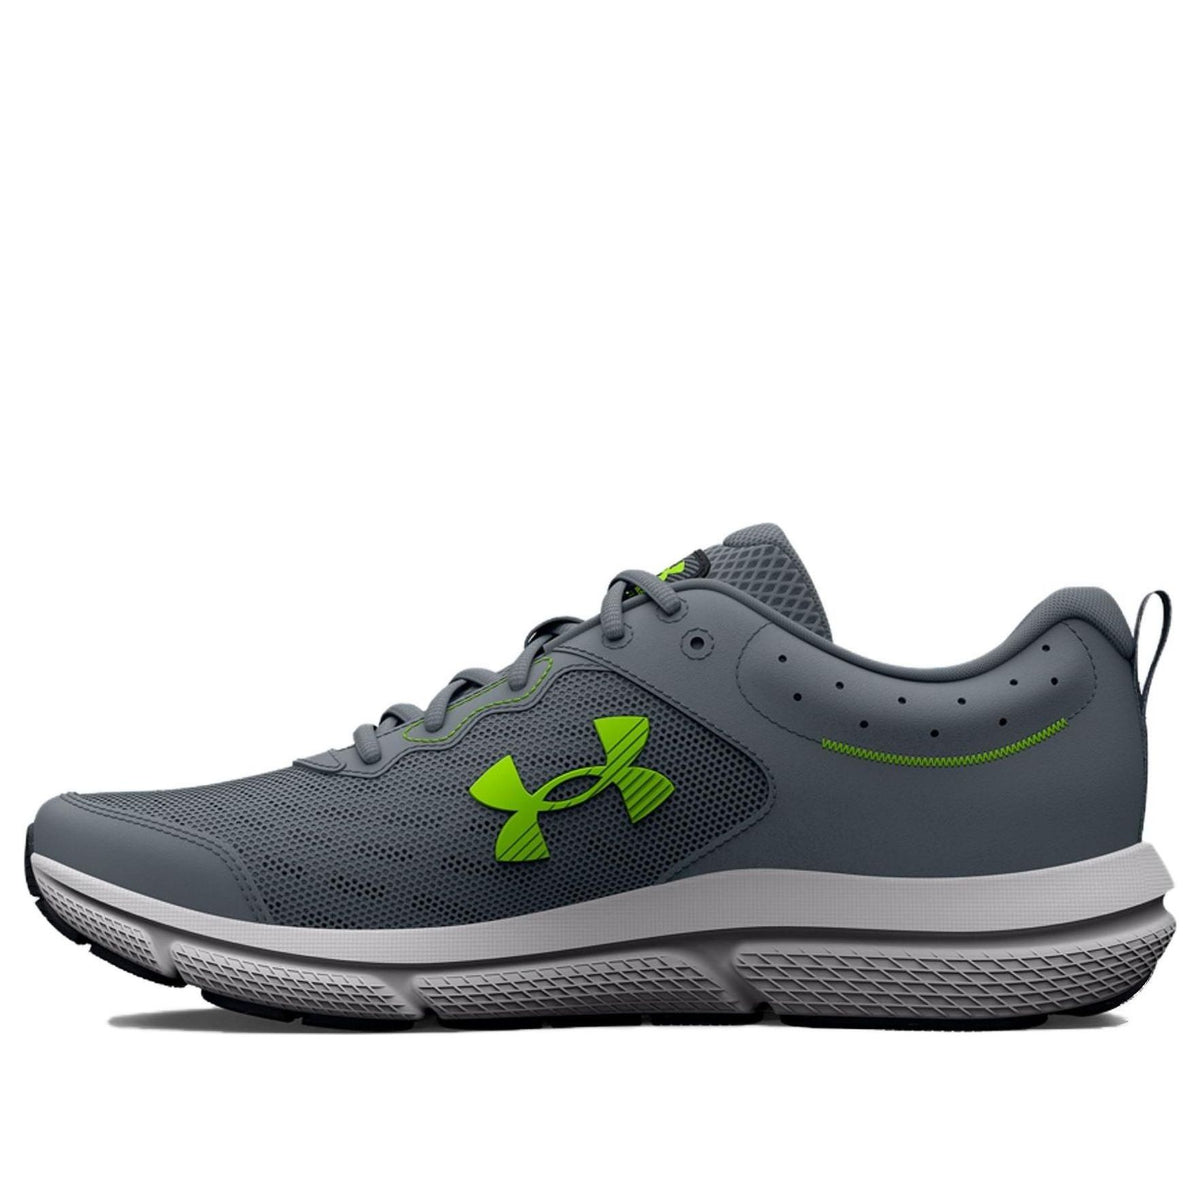 Under Armour Charged Assert 10 4E Wide 'Gravel Lime Surge' 3026176-101 ...